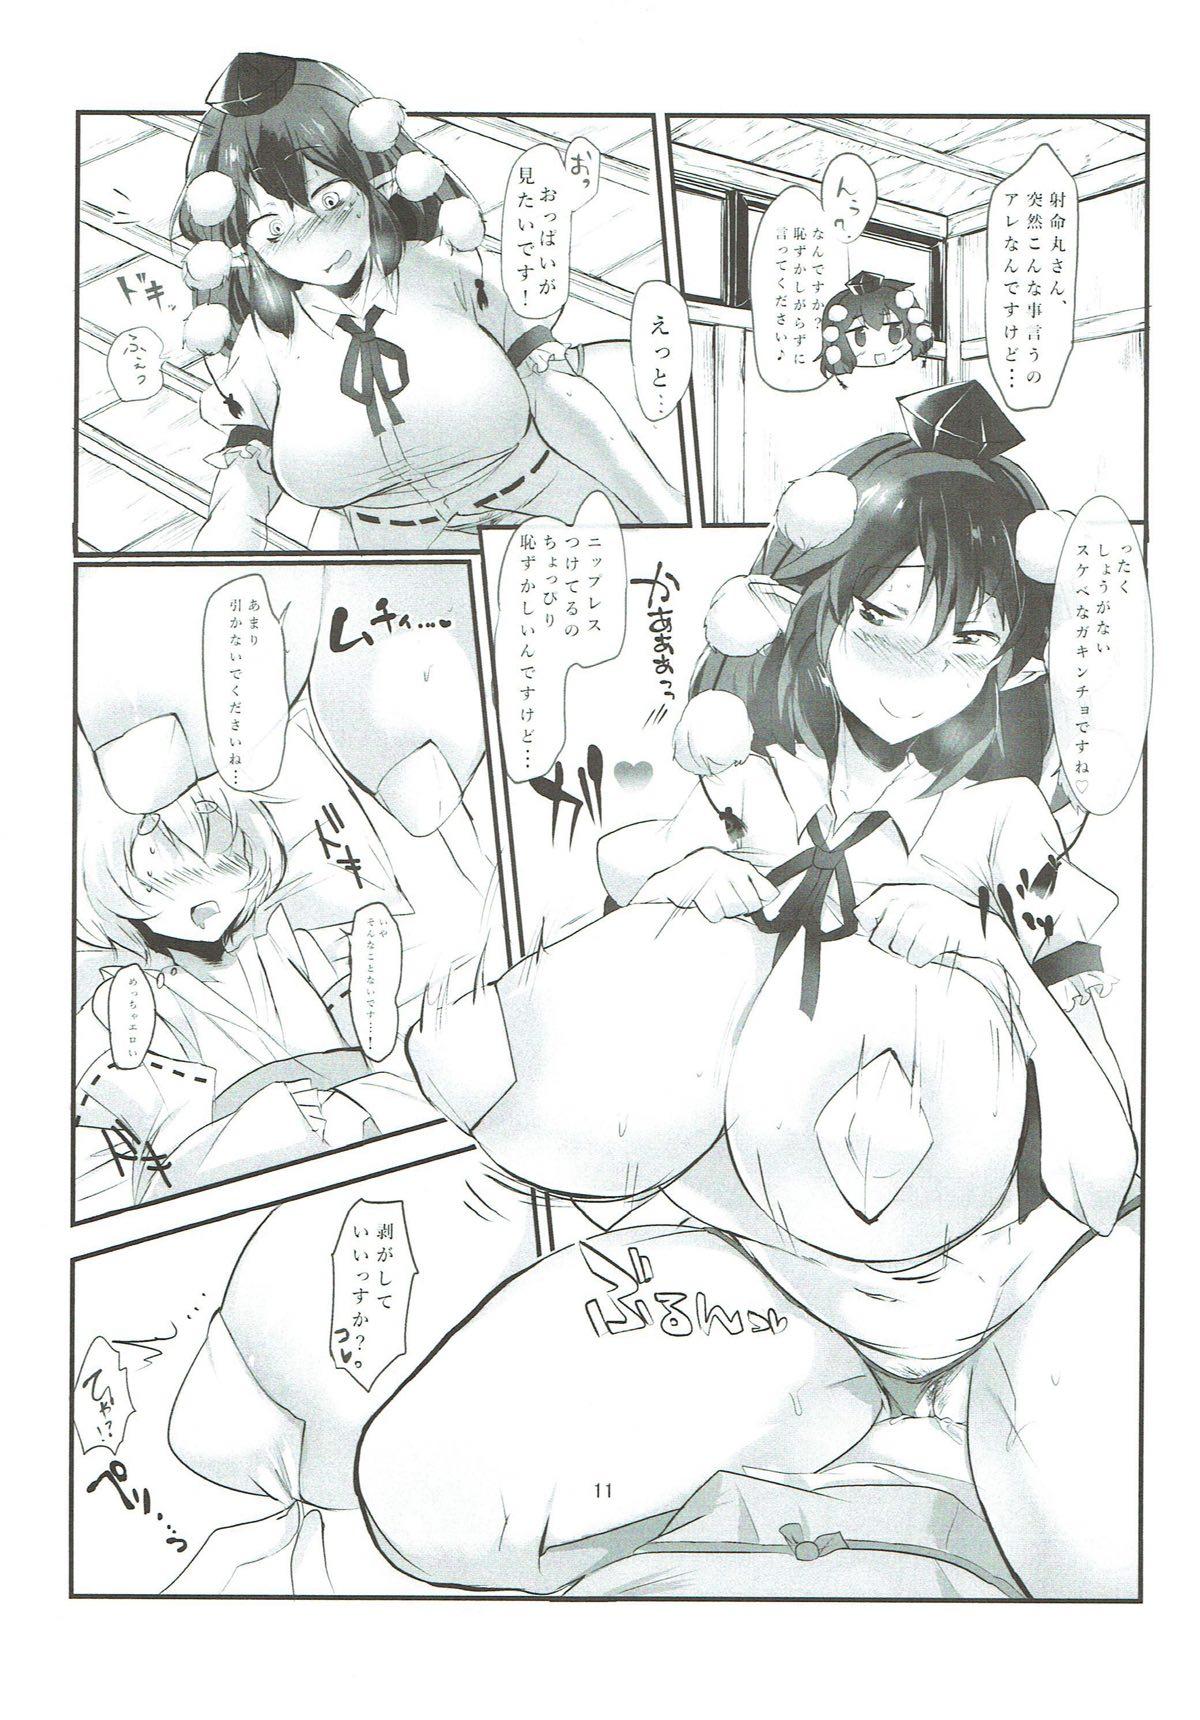 Blow Job あやもみ サンドオーガズム 東方Project - Touhou project Hot Girls Getting Fucked - Page 12